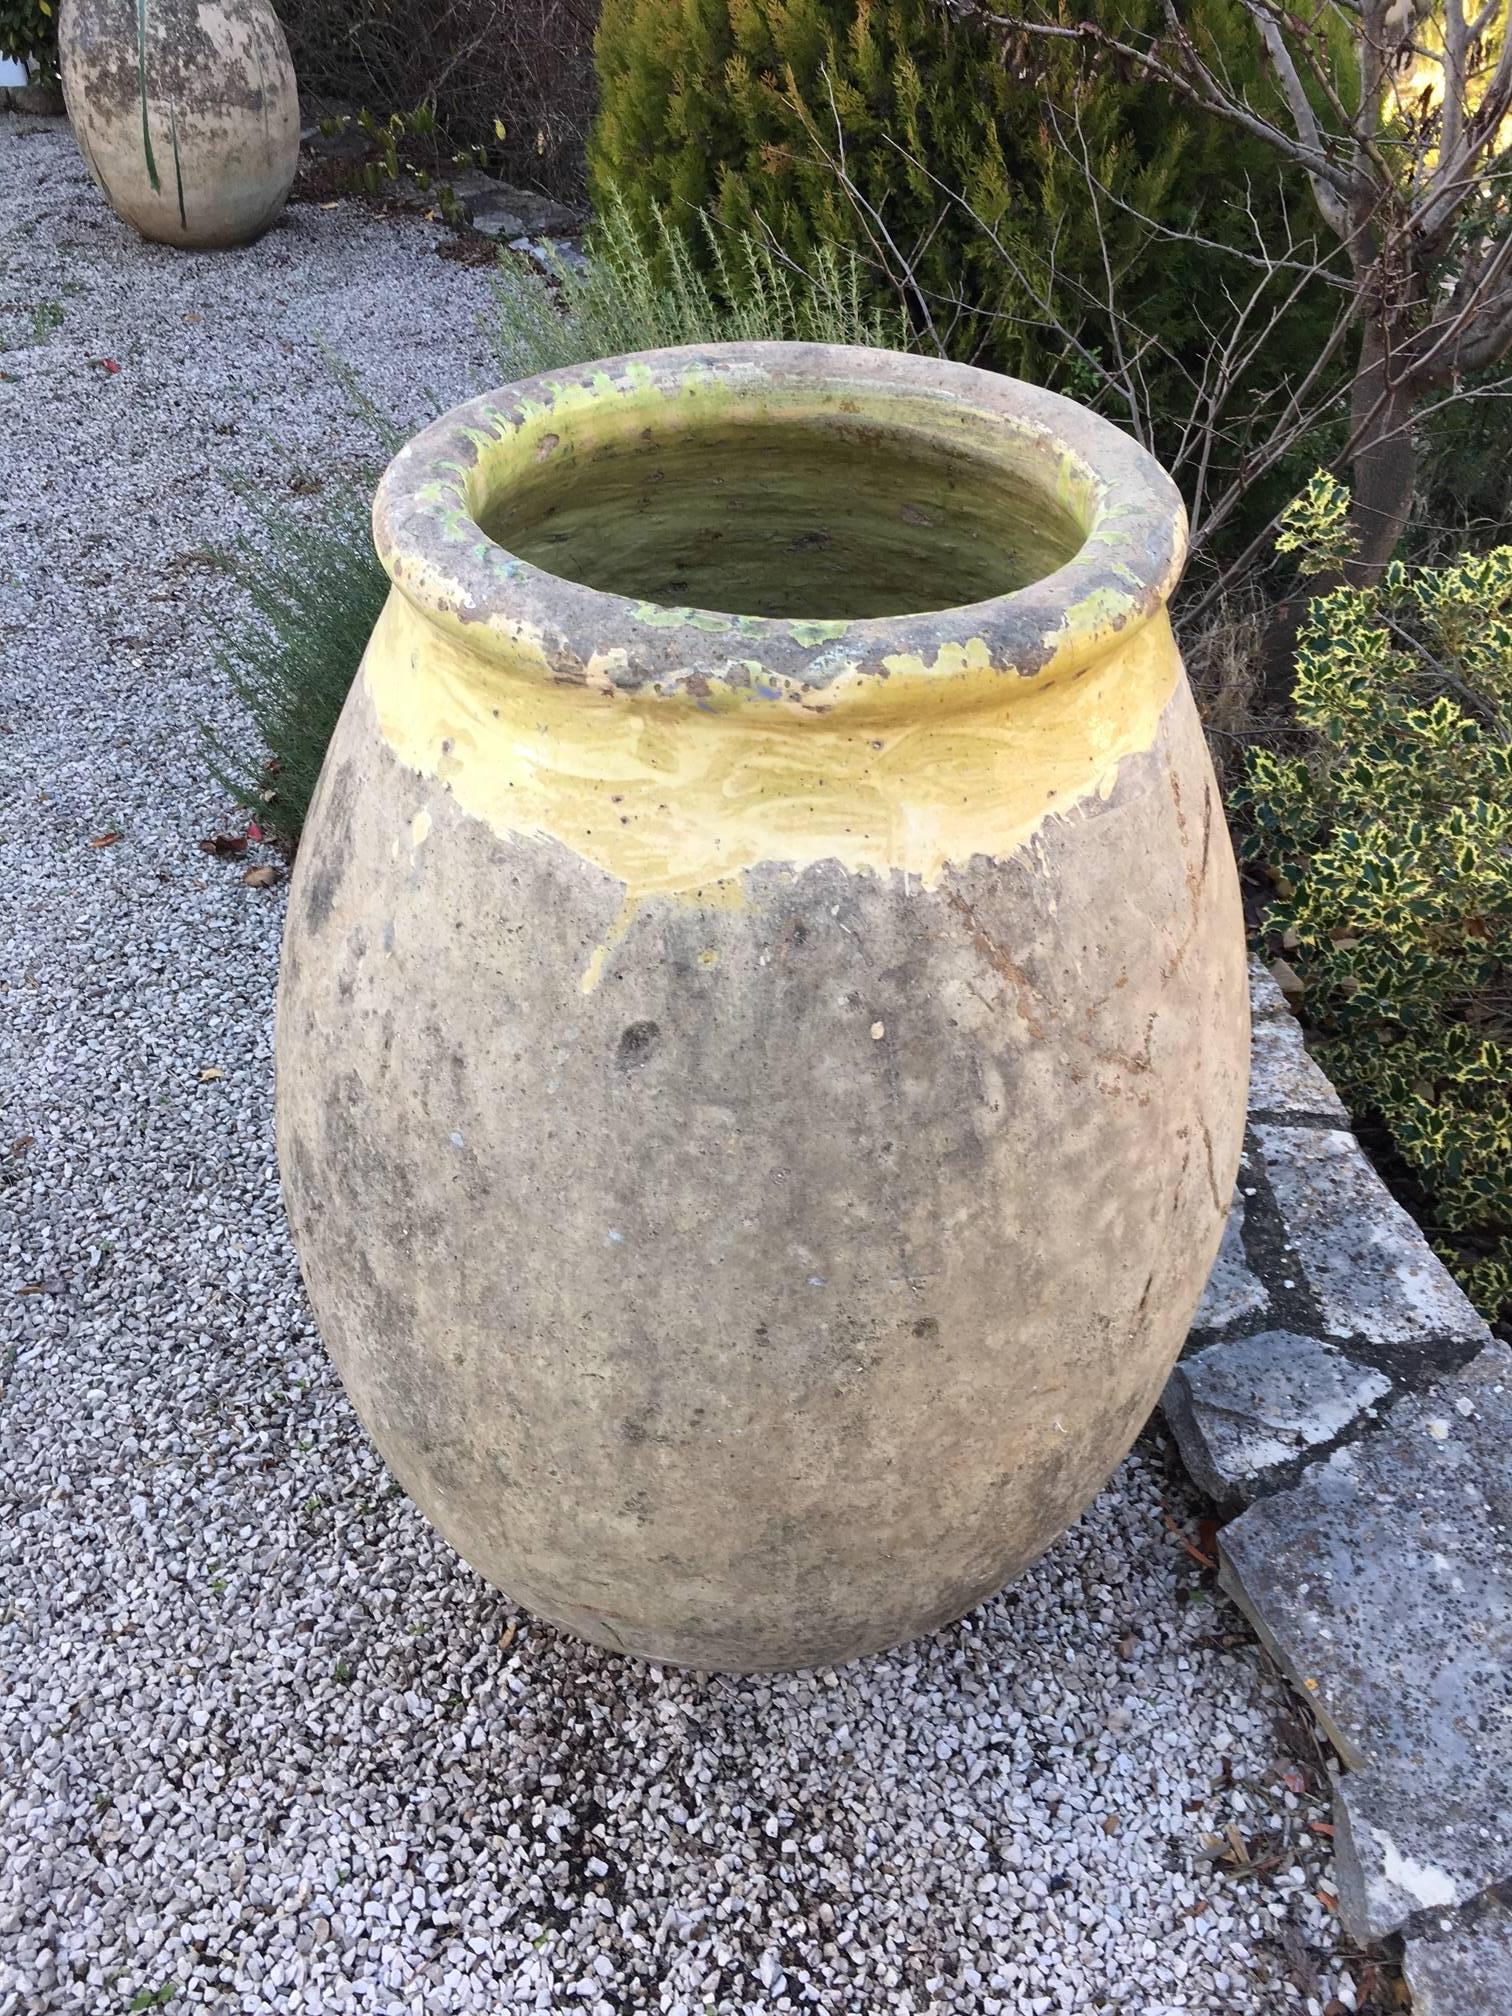 A large jar from Biot produced in the South of France, circa 19th century.
Terra cotta with yellow glazed rim, original patina.
Originally used as storage containers for olive.